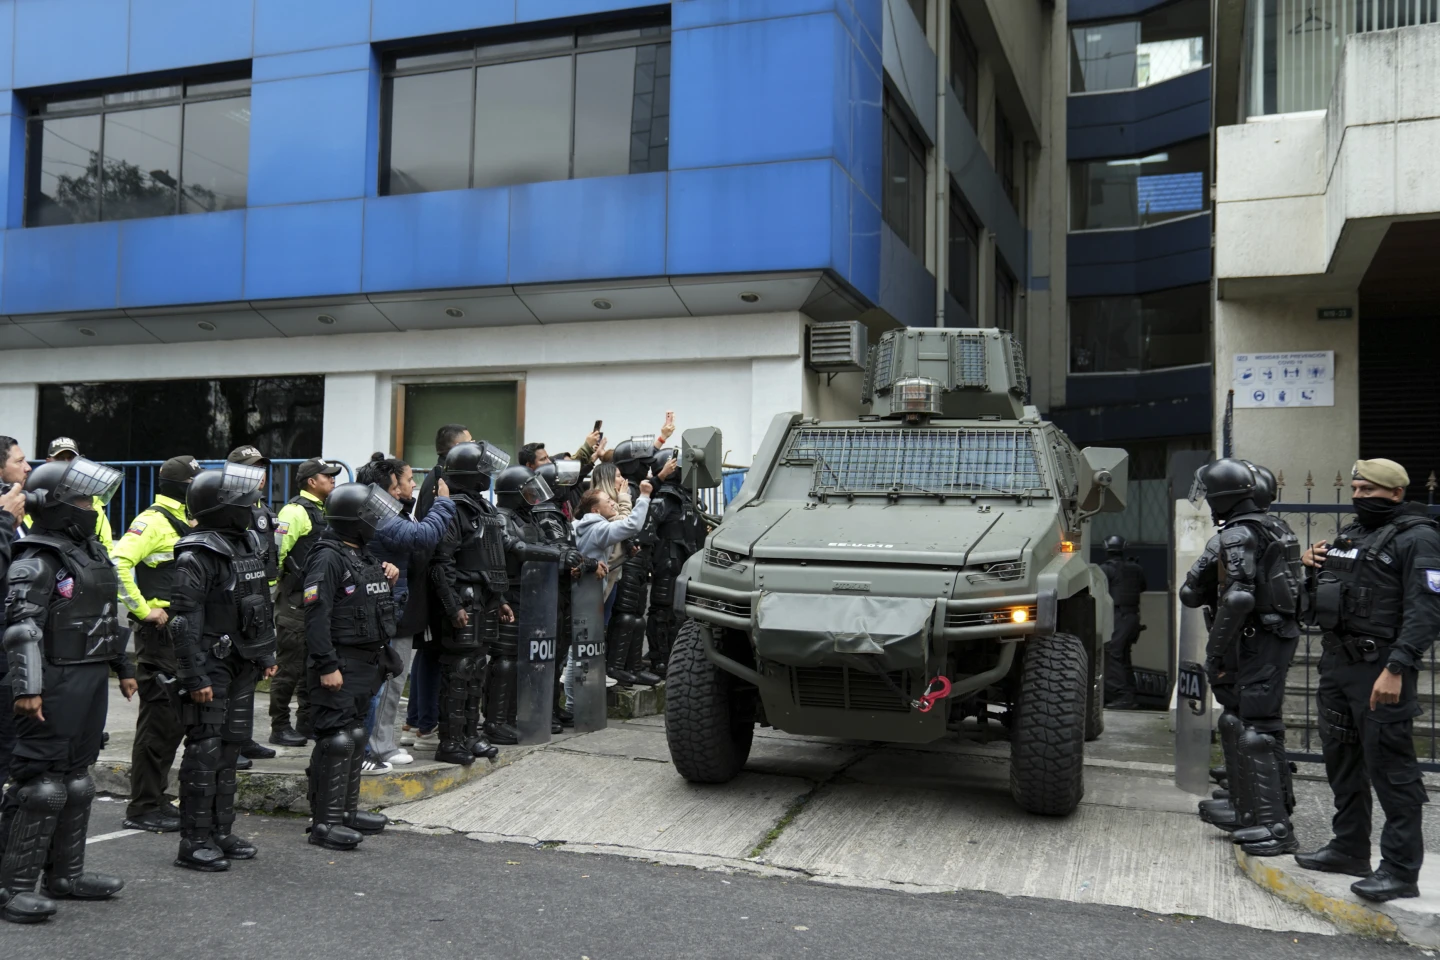 Mexico Is Breaking Diplomatic Ties with Ecuador After Police Stormed the Embassy in Quito